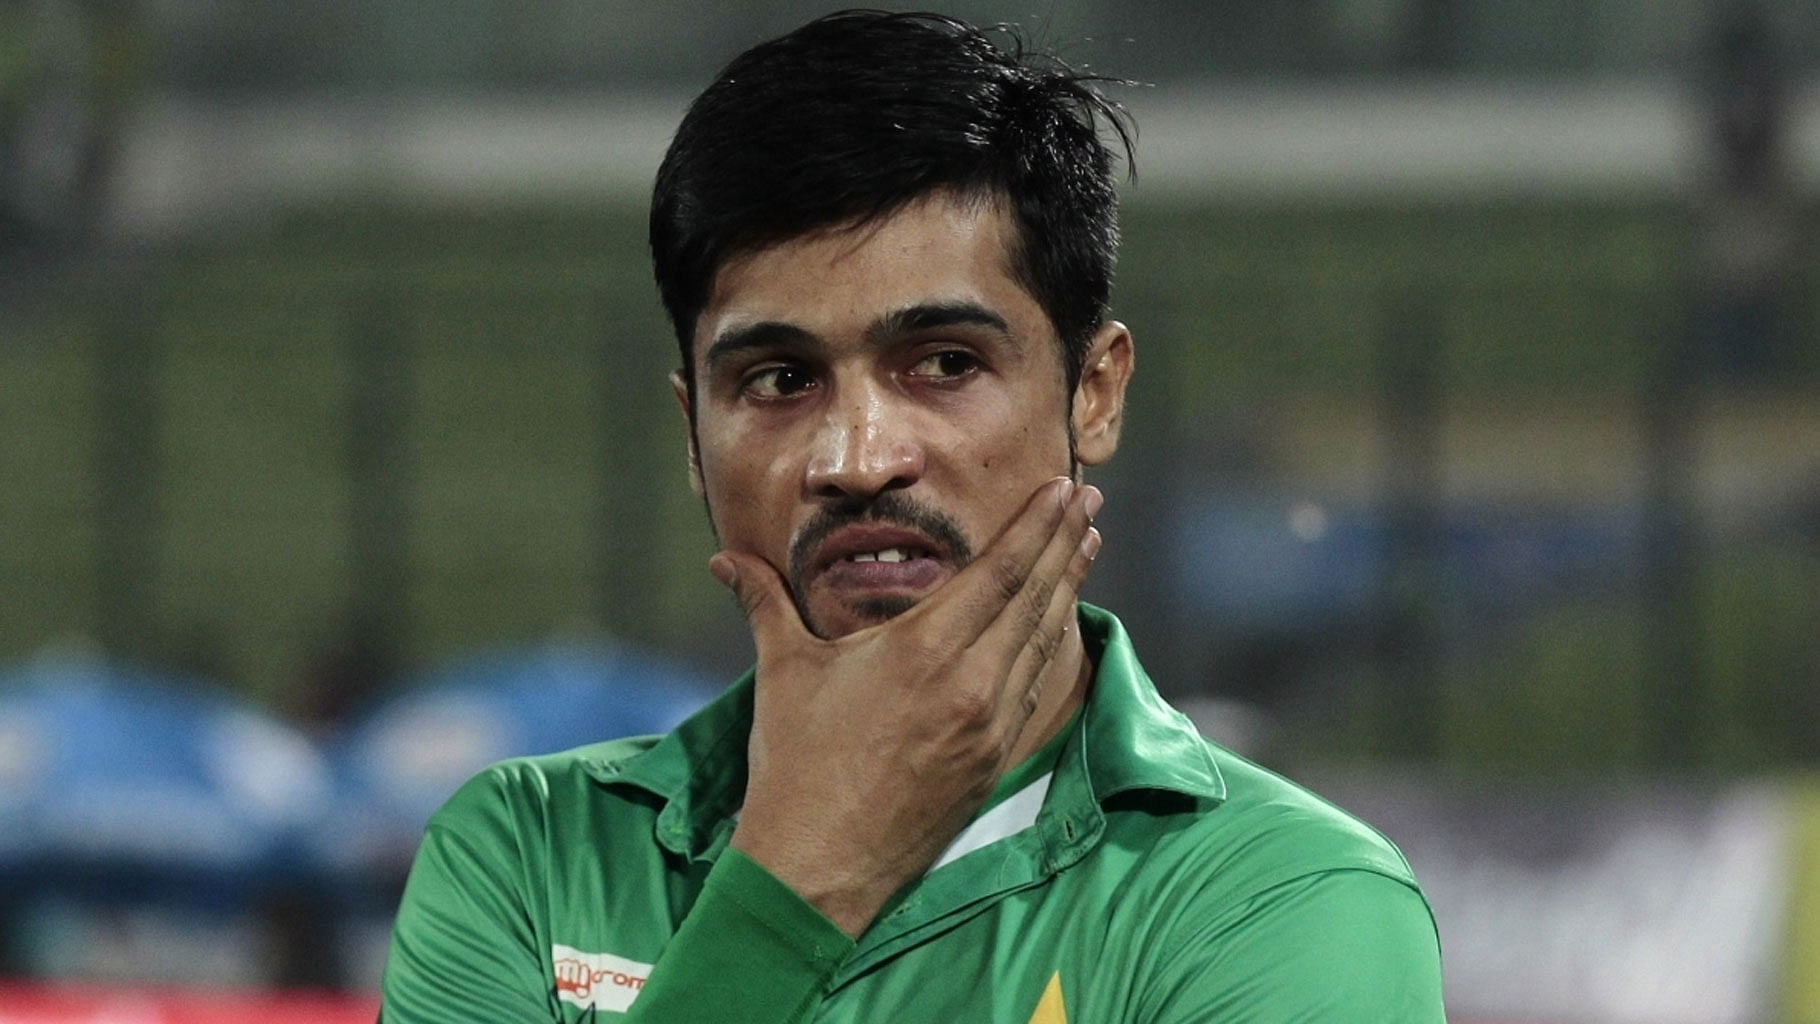 Mohammad Amir and Haris Sohail have pulled out of the upcoming England tour due to personal reasons.